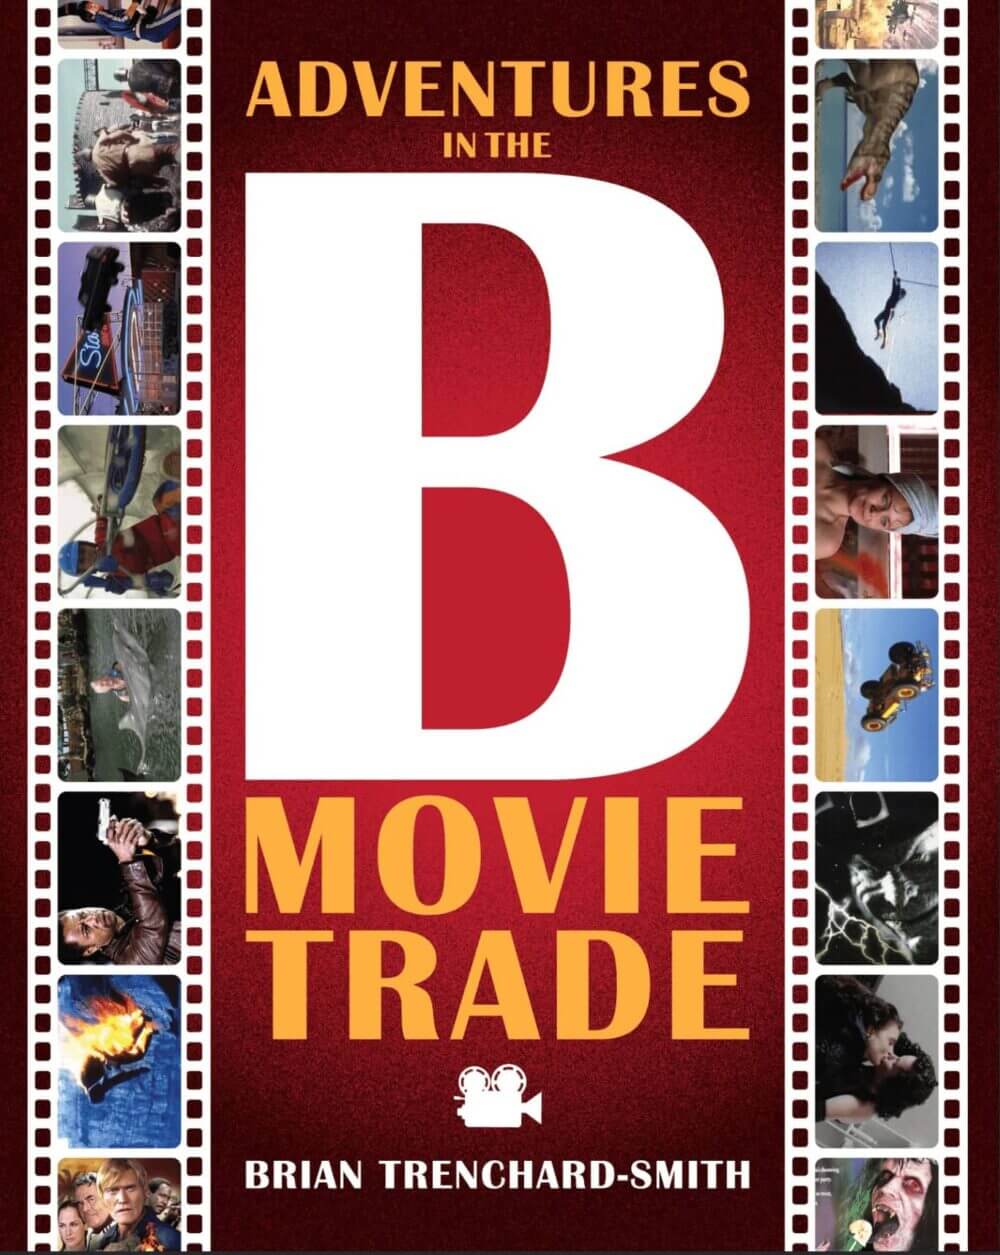 The book cover of Brian Trenchard-Smith's book Adventures in the B Movie Trade, with images from his films.